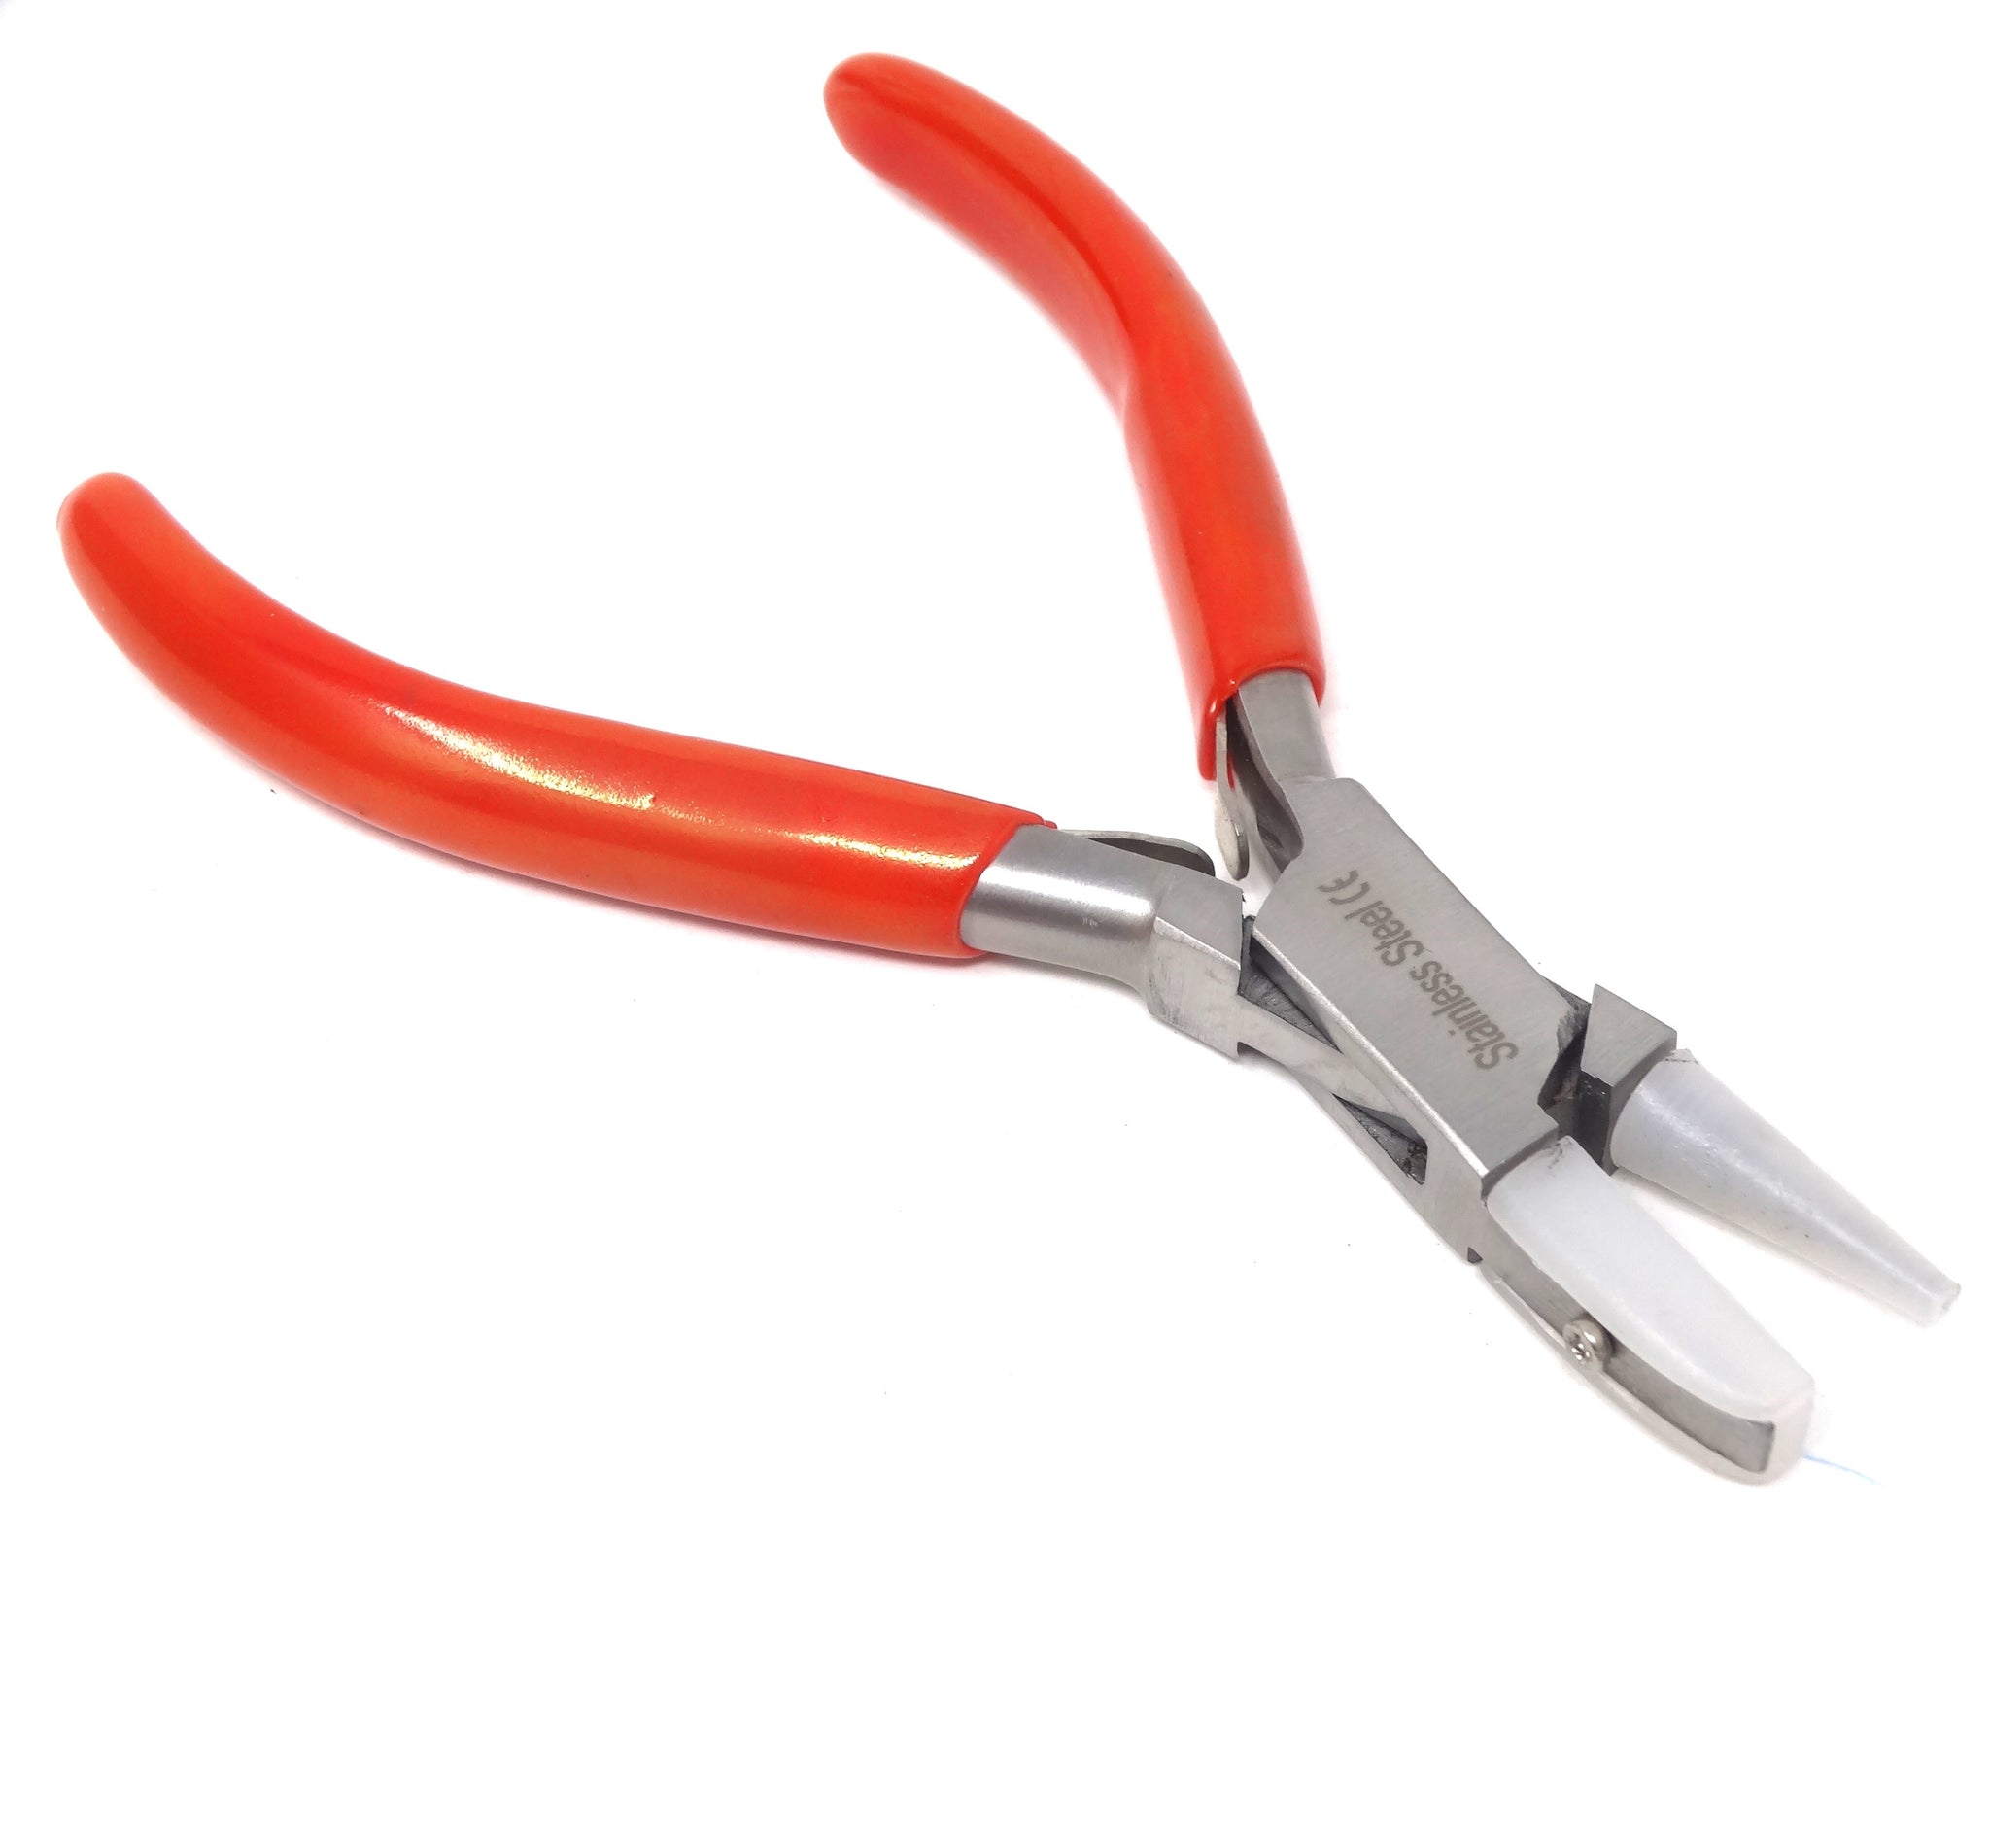 5.3 Inch Flat Nose Pliers Nylon Jaw Pliers Holding and Bending Pliers 2  Extra Nylon Tips Free 